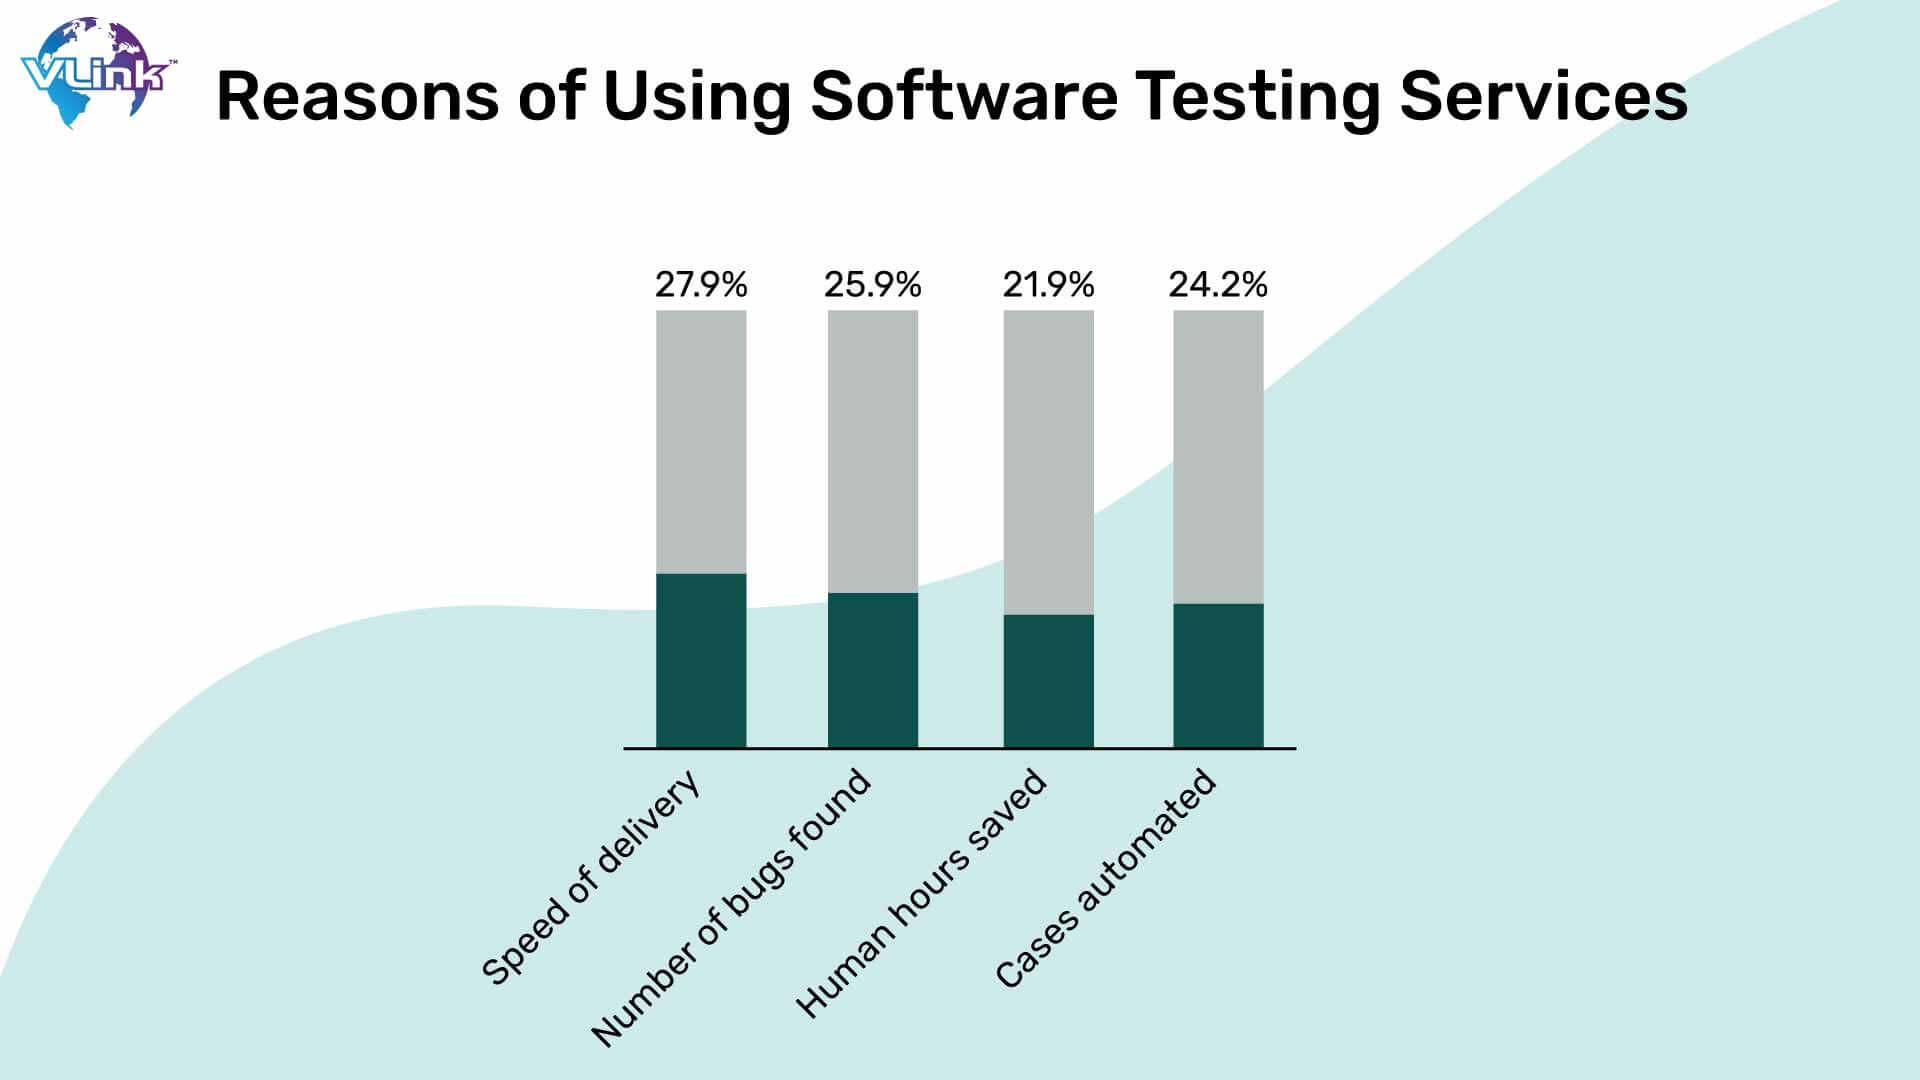 Reasons for using software testing services